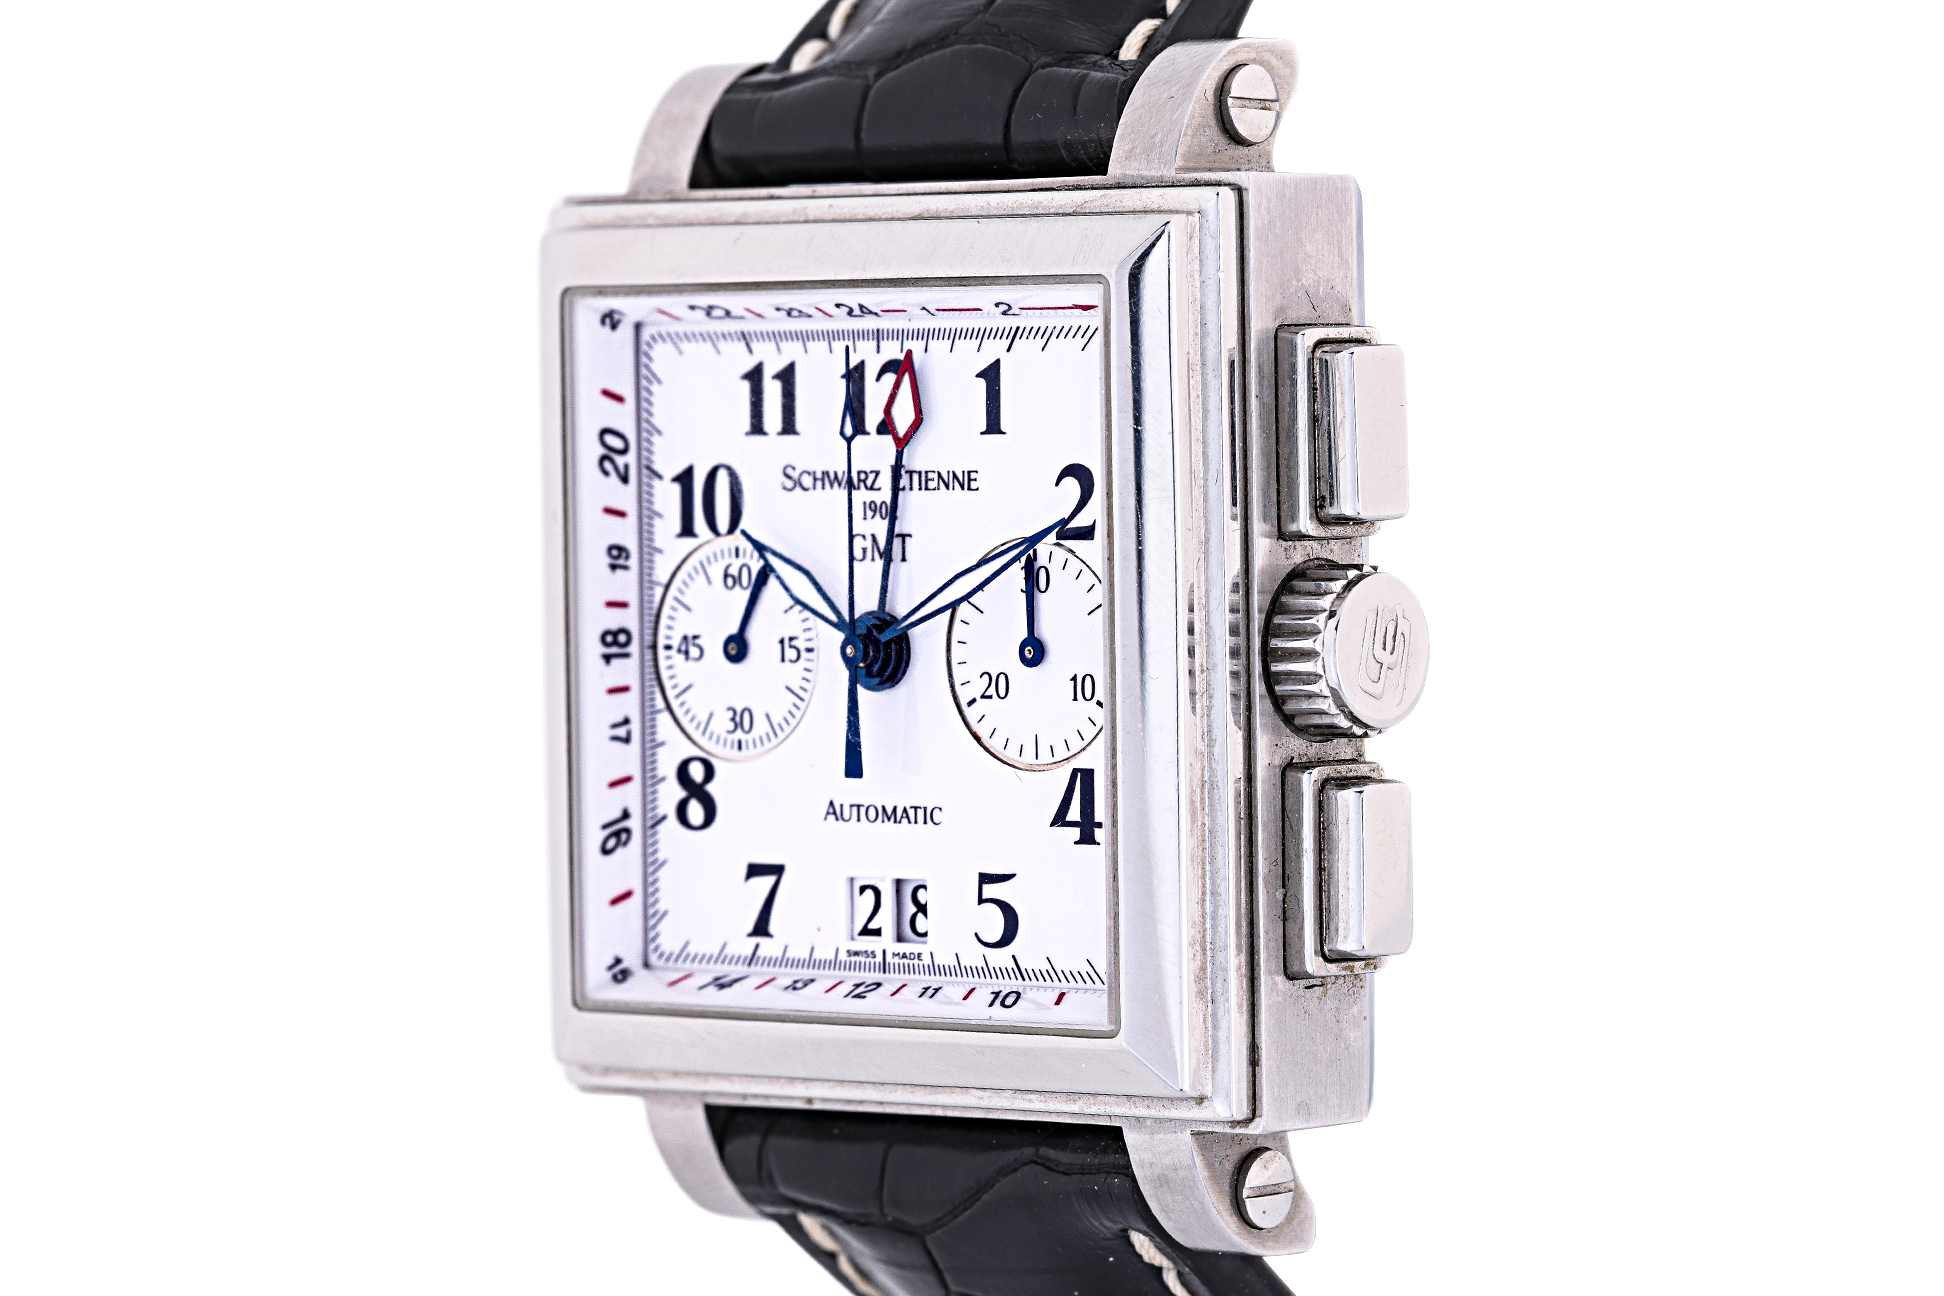 A SCHWARZ ETIENNE STAINLESS STEEL AUTOMATIC WATCH - Image 2 of 7